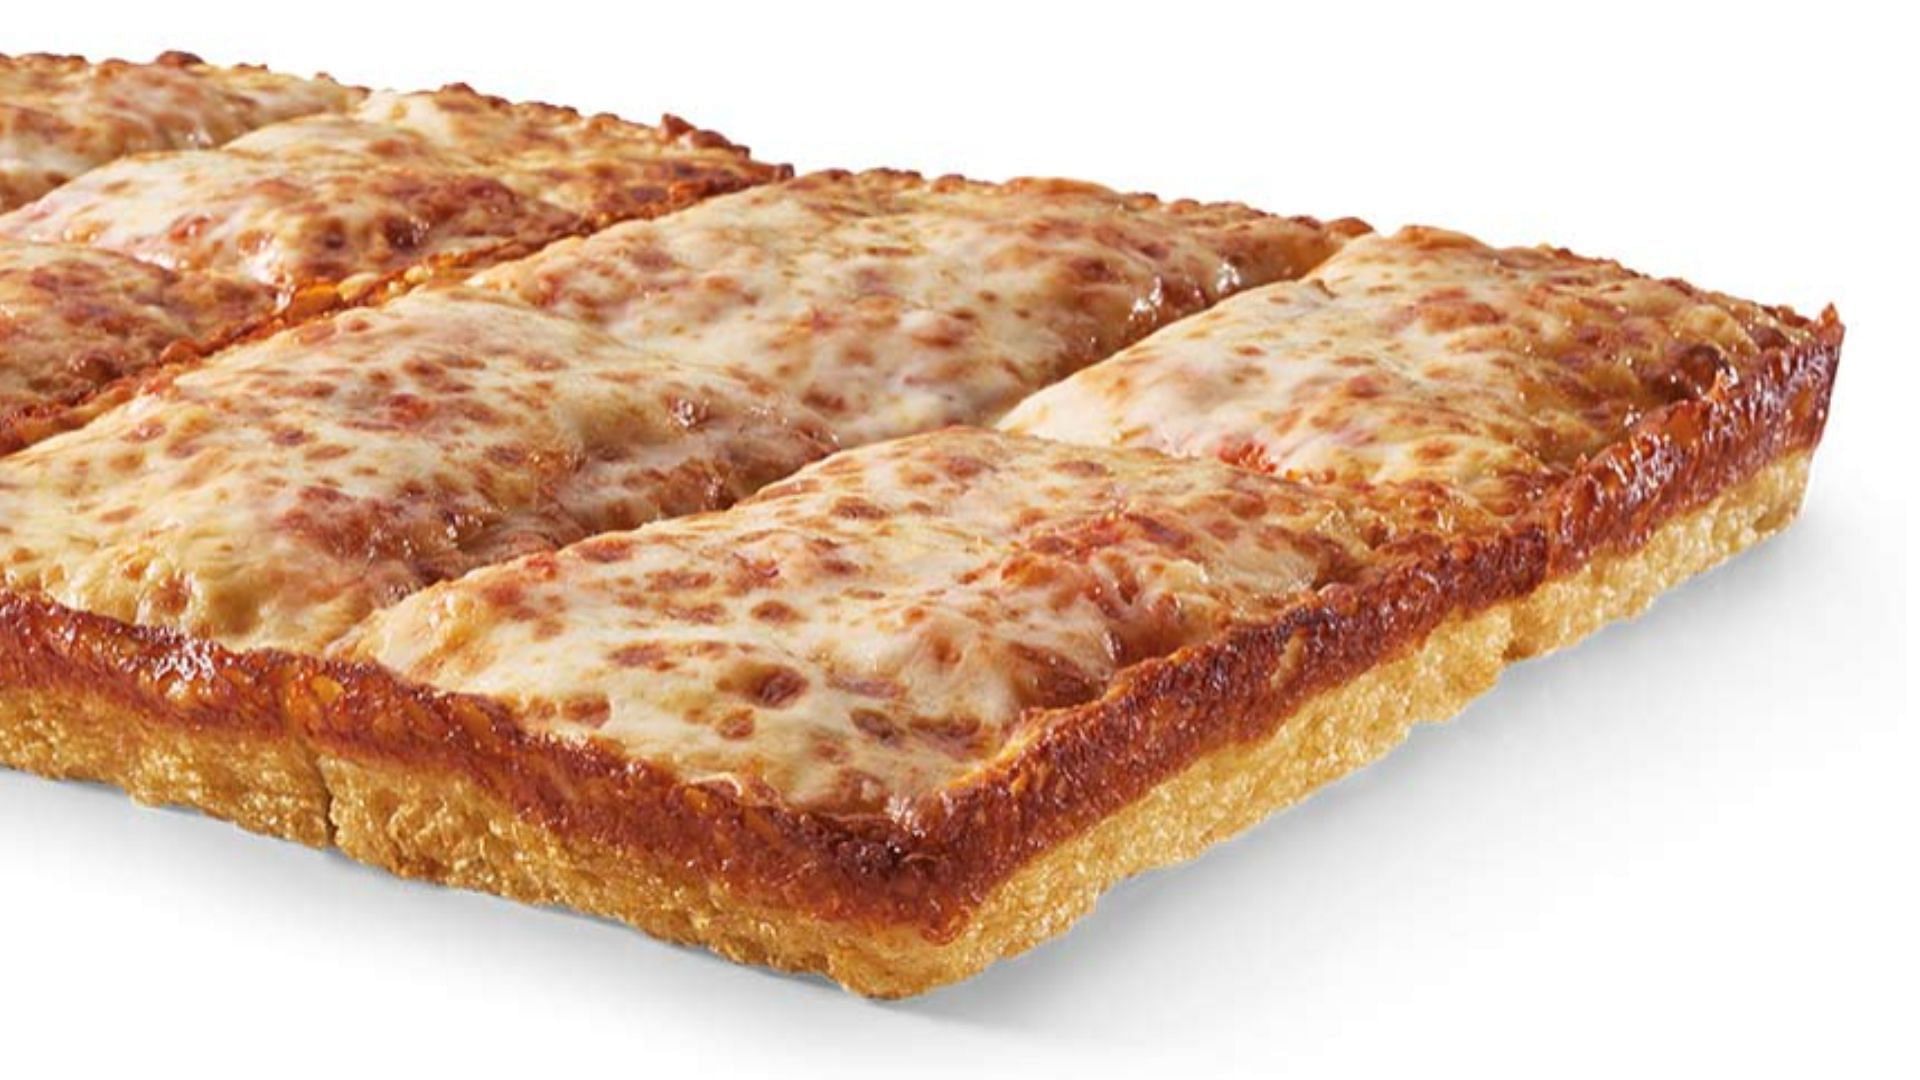 Detroit-Style Deep Dish pizza with Mozzarella cheese toppings (Image via Little Caesars)